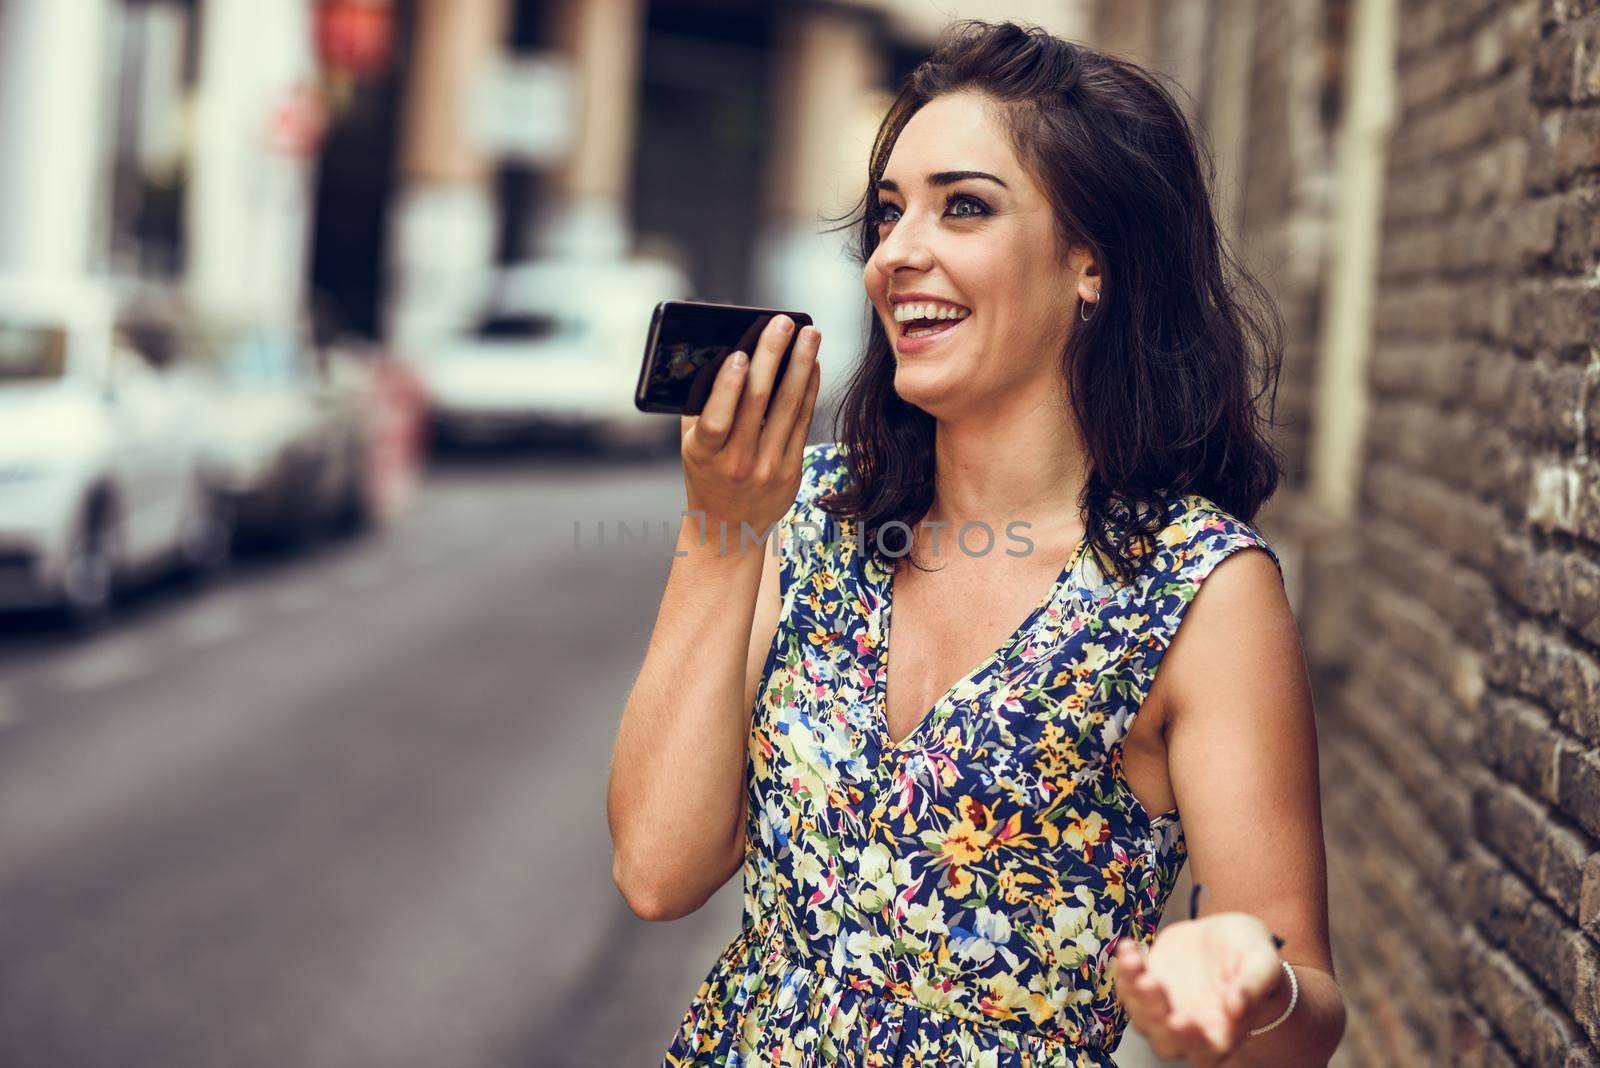 Smiling young woman recording voice note in her smart phone outdoors. Girl wearing flower dress in urban background. Technology concept.